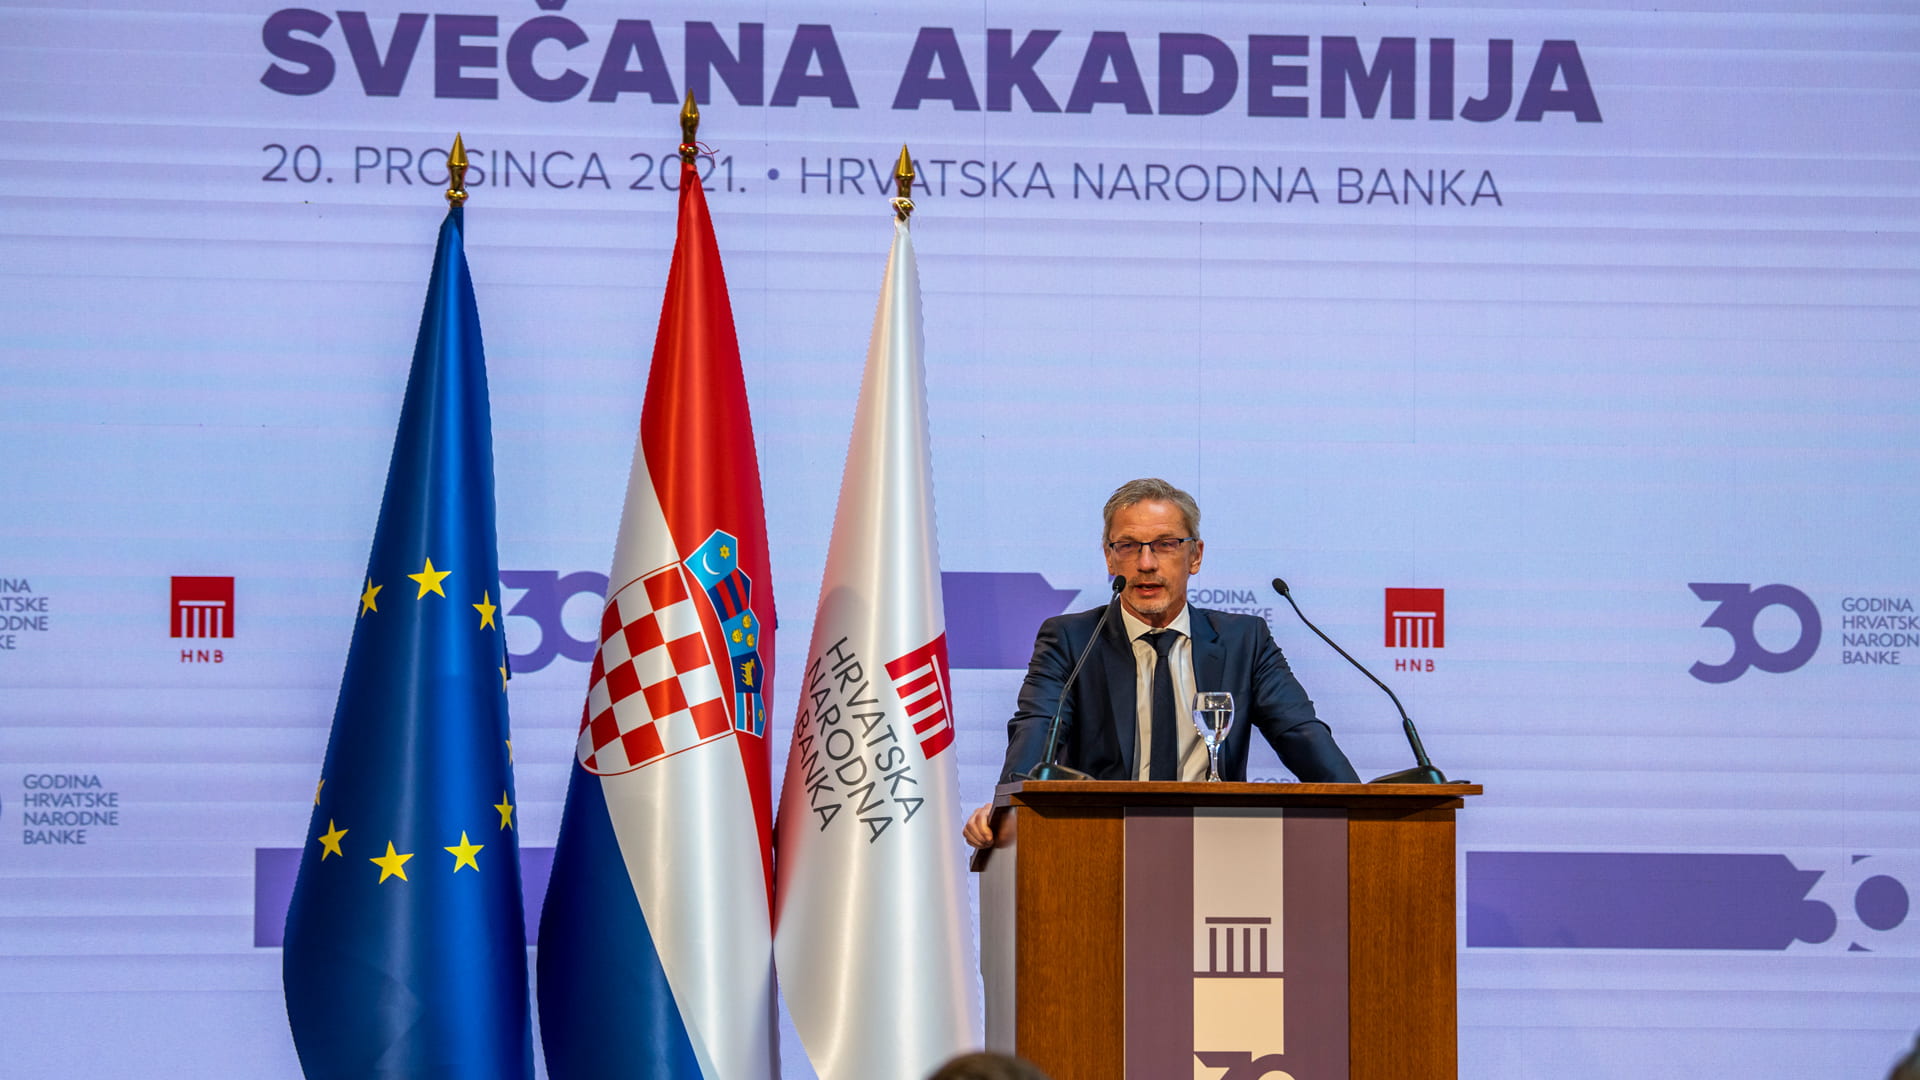 Anniversary Celebration on the Occasion of 30 Years of the Croatian National Bank